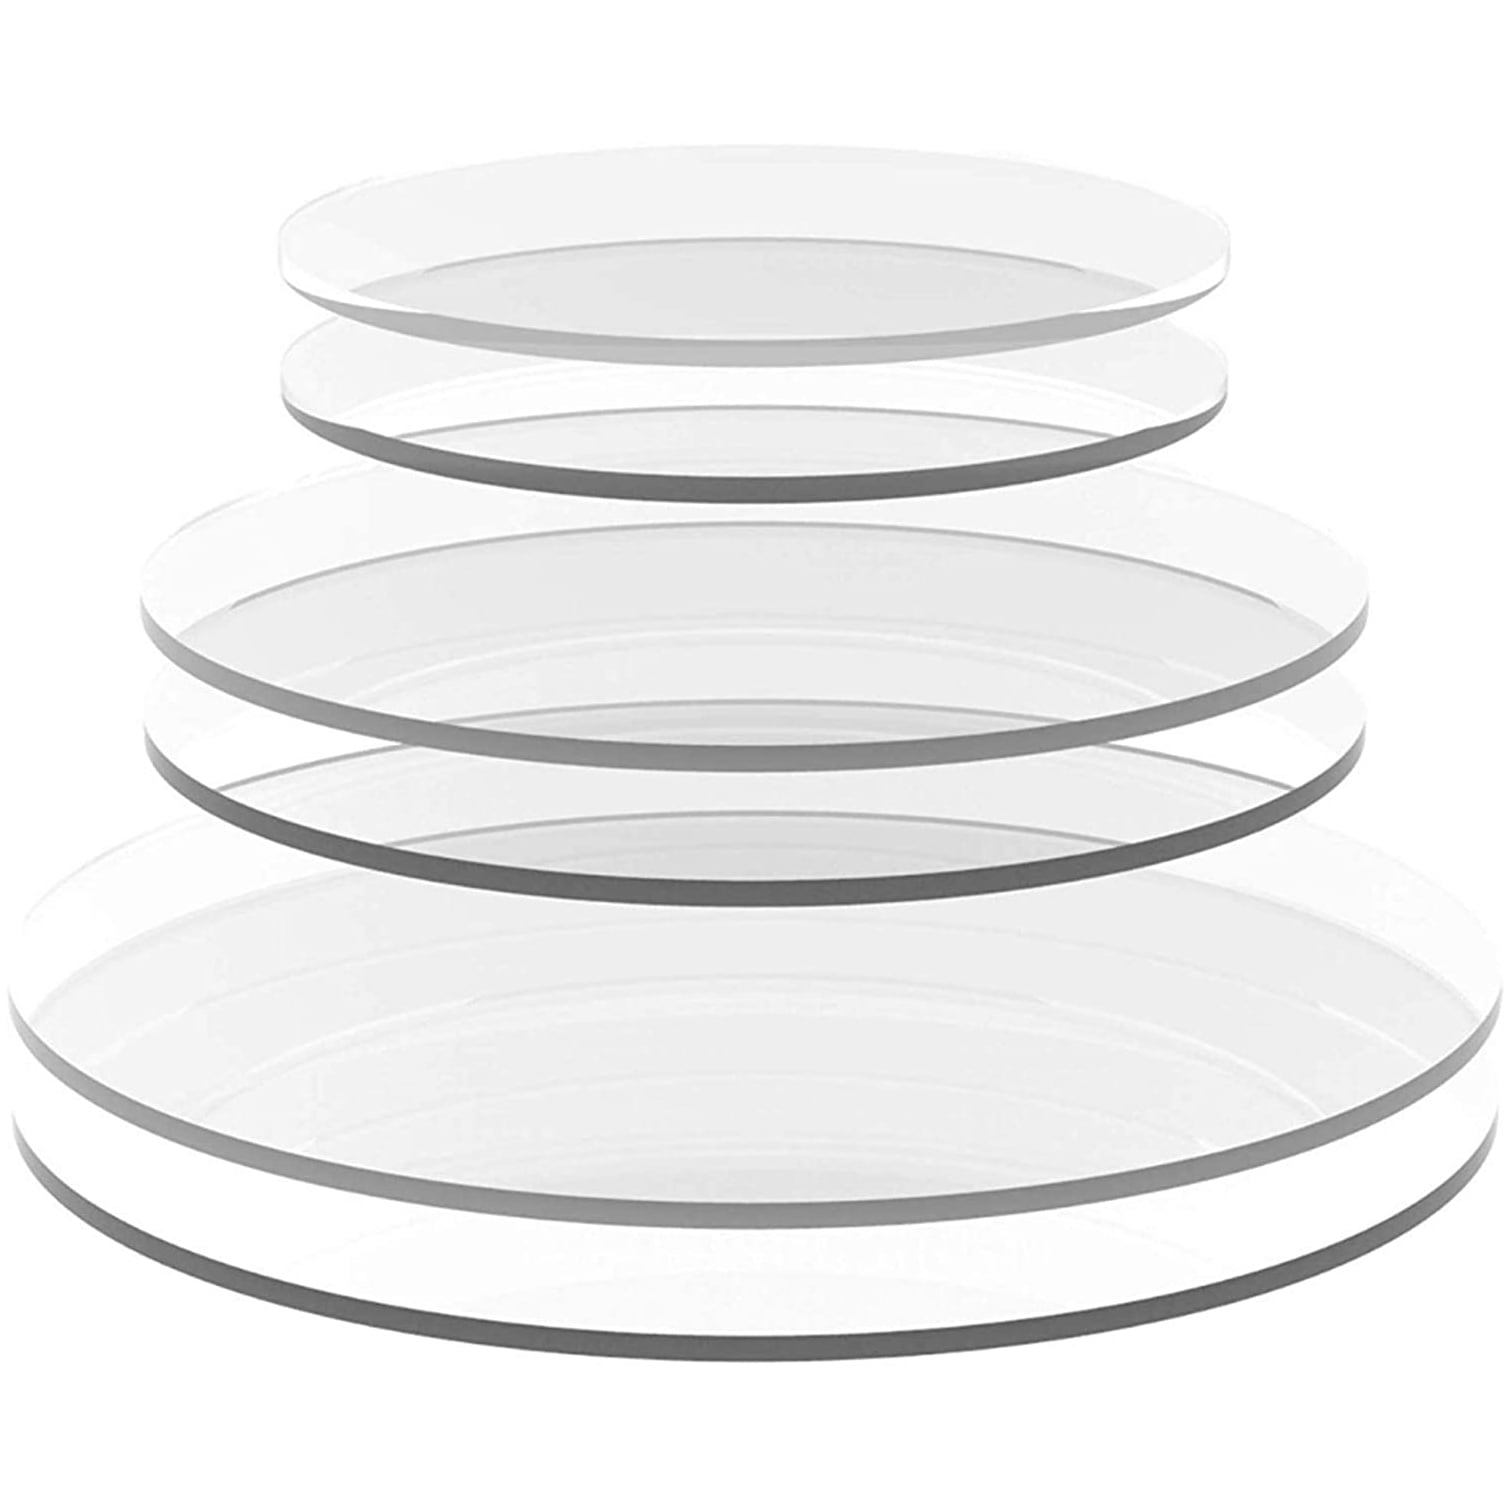 10 Pieces 6 Inch Clear Acrylic Circle Sheet Acrylic Round Disc Acrylic Circle Blank Plastic Disc for Cake Holders Coasters Picture Frame Painting Art Project DIY Crafts Protection for Furniture 